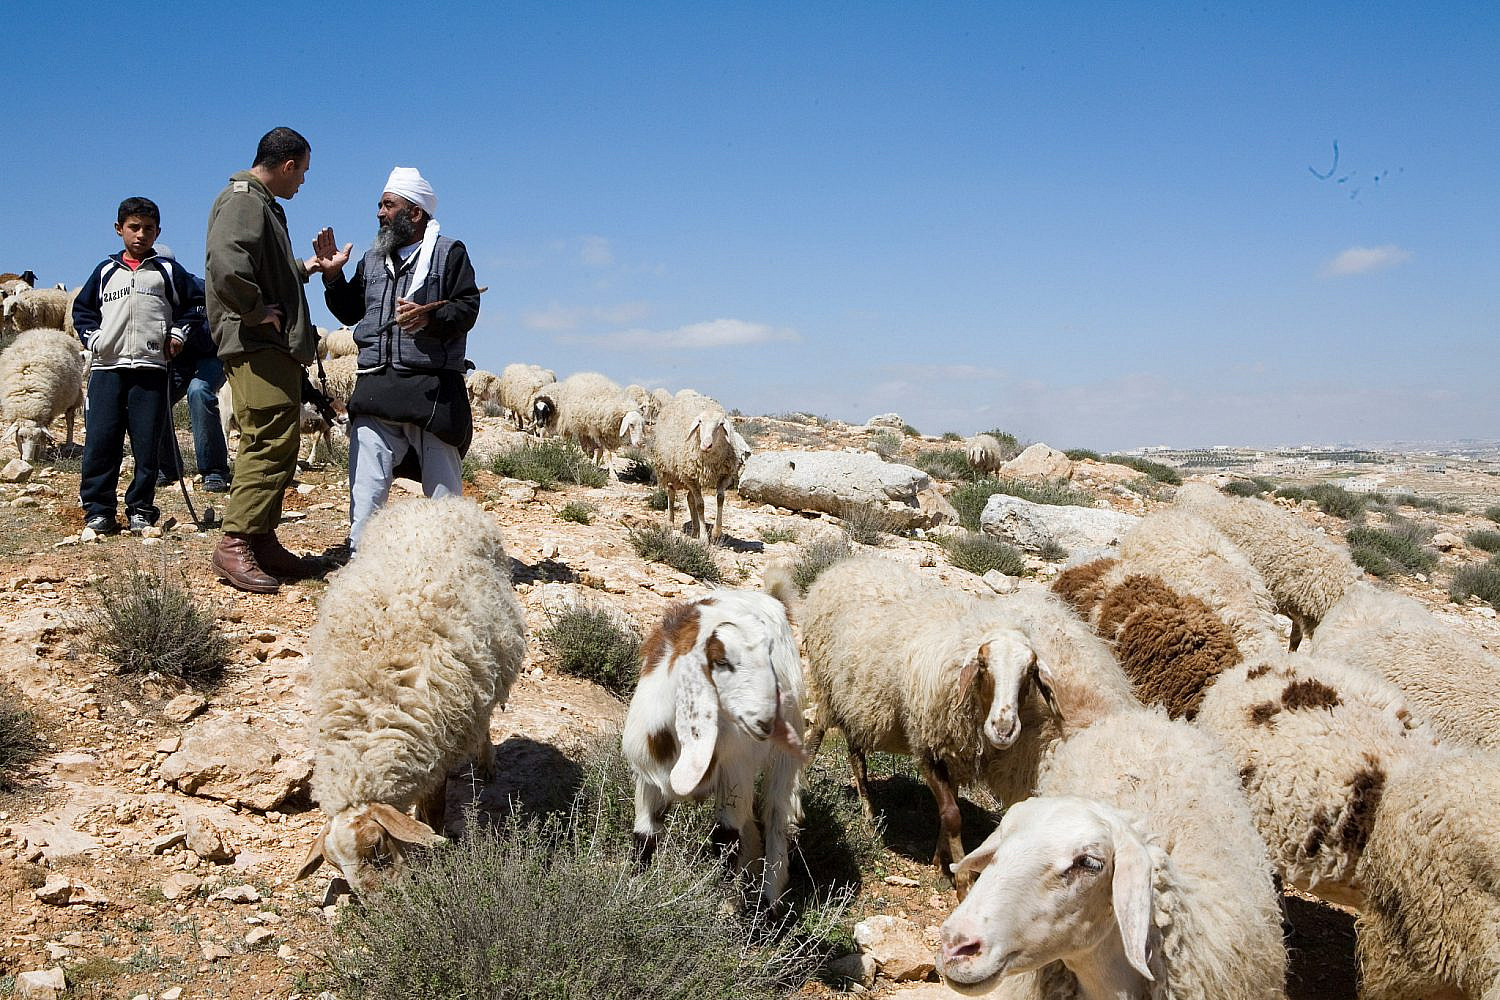 A Palestinian shepherd argues with an Israeli soldier during a solidarity visit for the Bedouin community in Umm-al Khair, South Hebron Hills, March 15, 2008. (Keren Manor/Activestills)